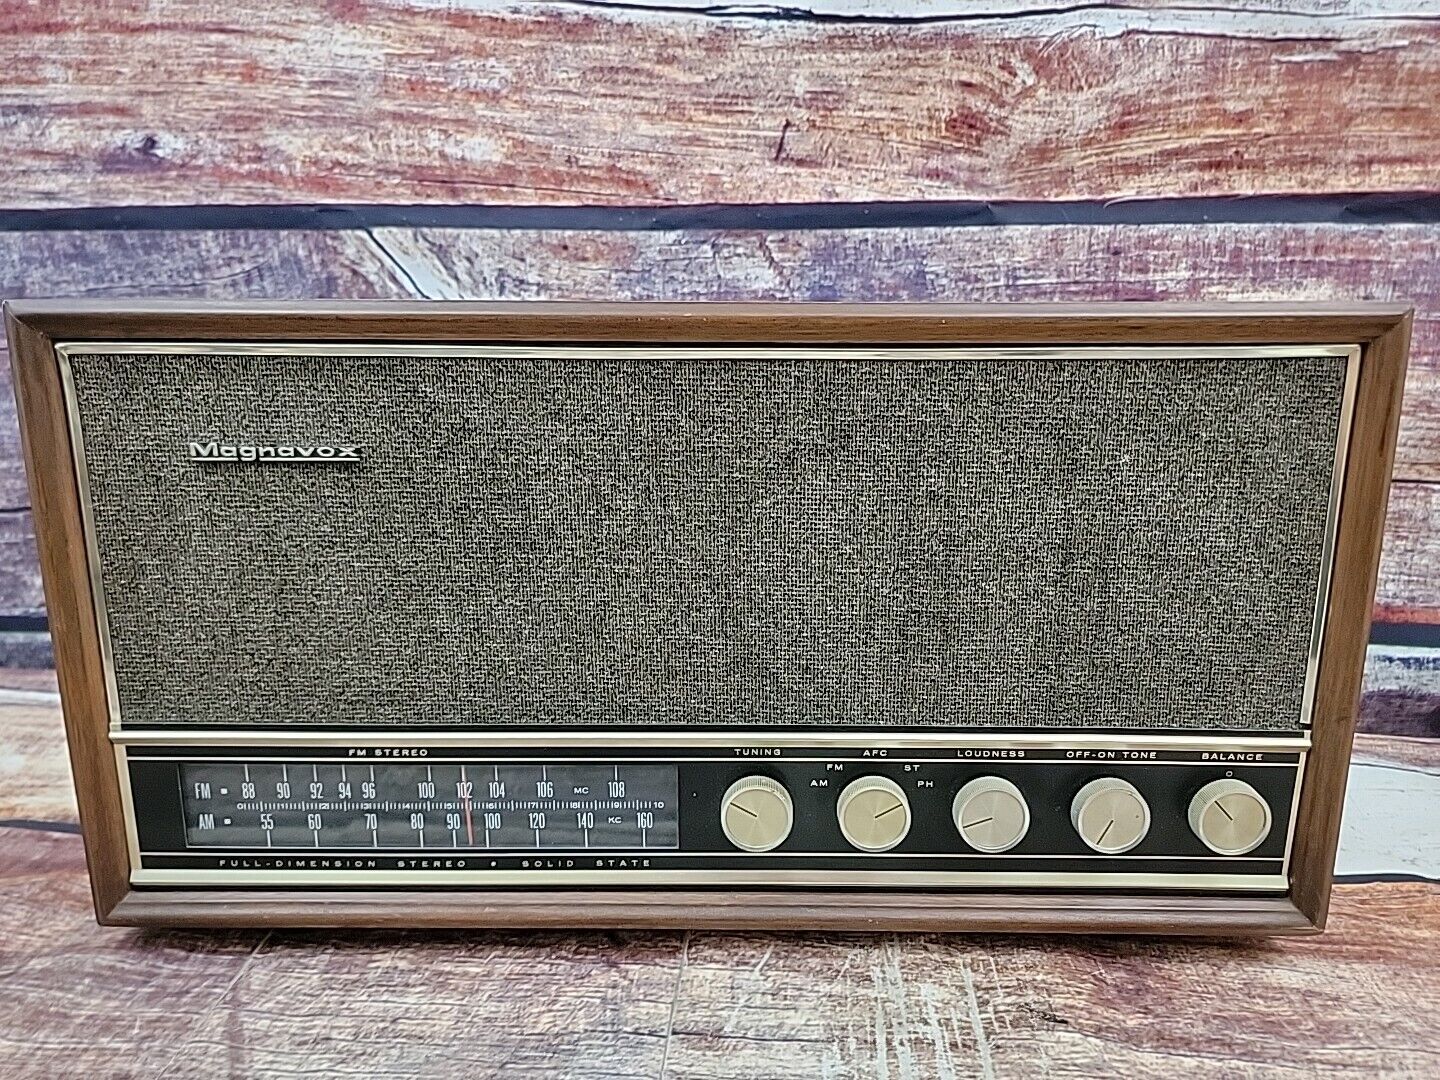 Vintage Magnavox Tabletop Walnut AM/FM 60s Radio - Tested And Working 